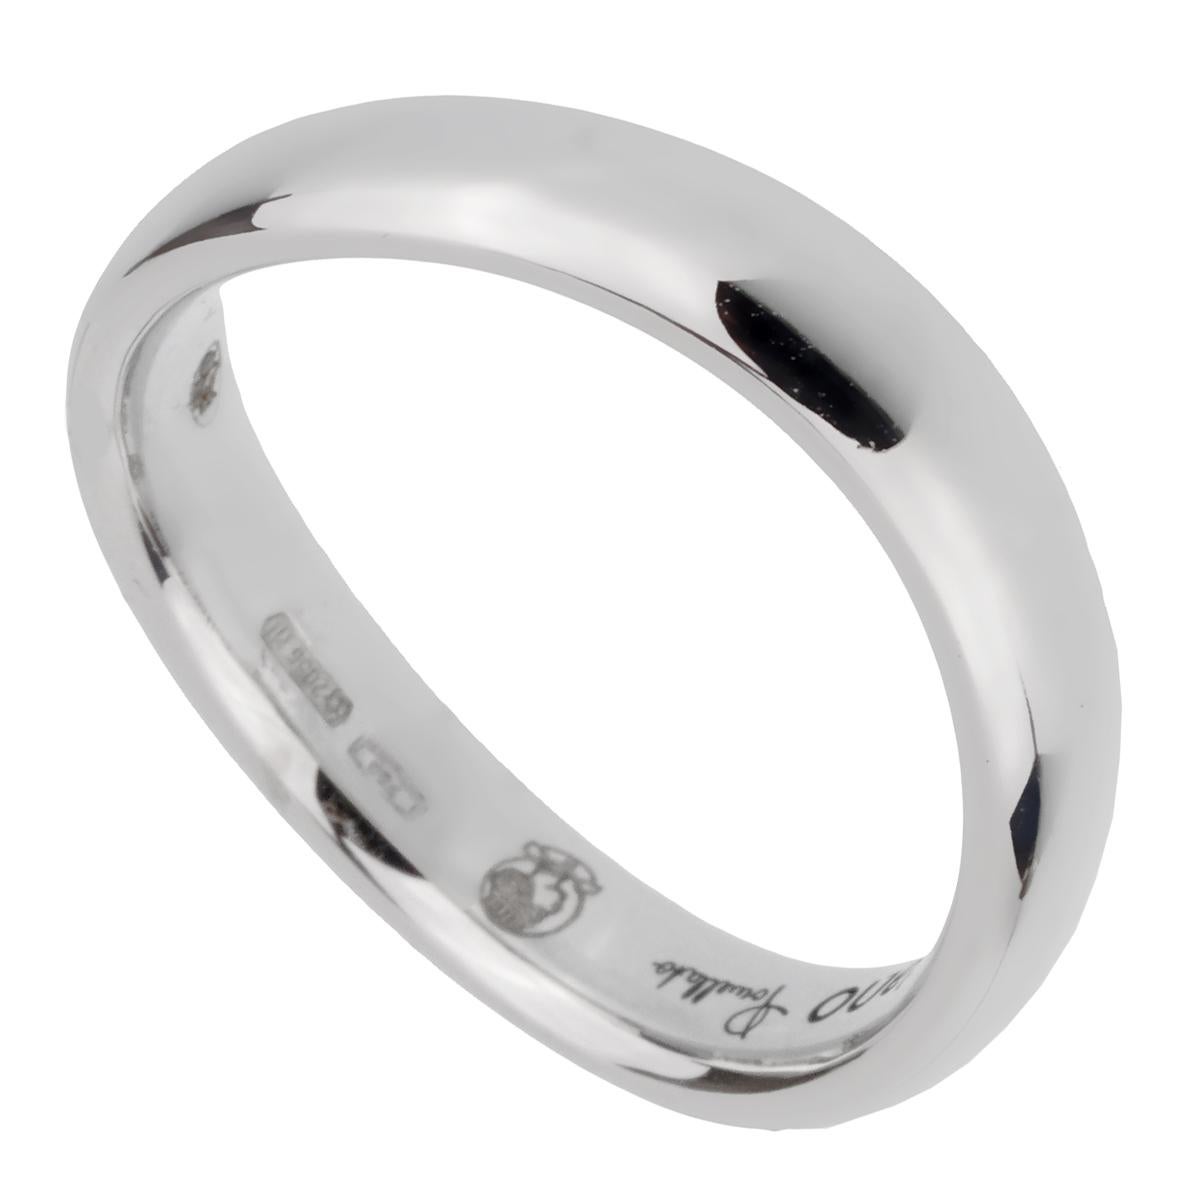 A chic Pomellato wave style band crafted in 18k white gold, the ring measures a size 5 and can be resized.

Pomellato Retail Price: $1350
Sku: 2400